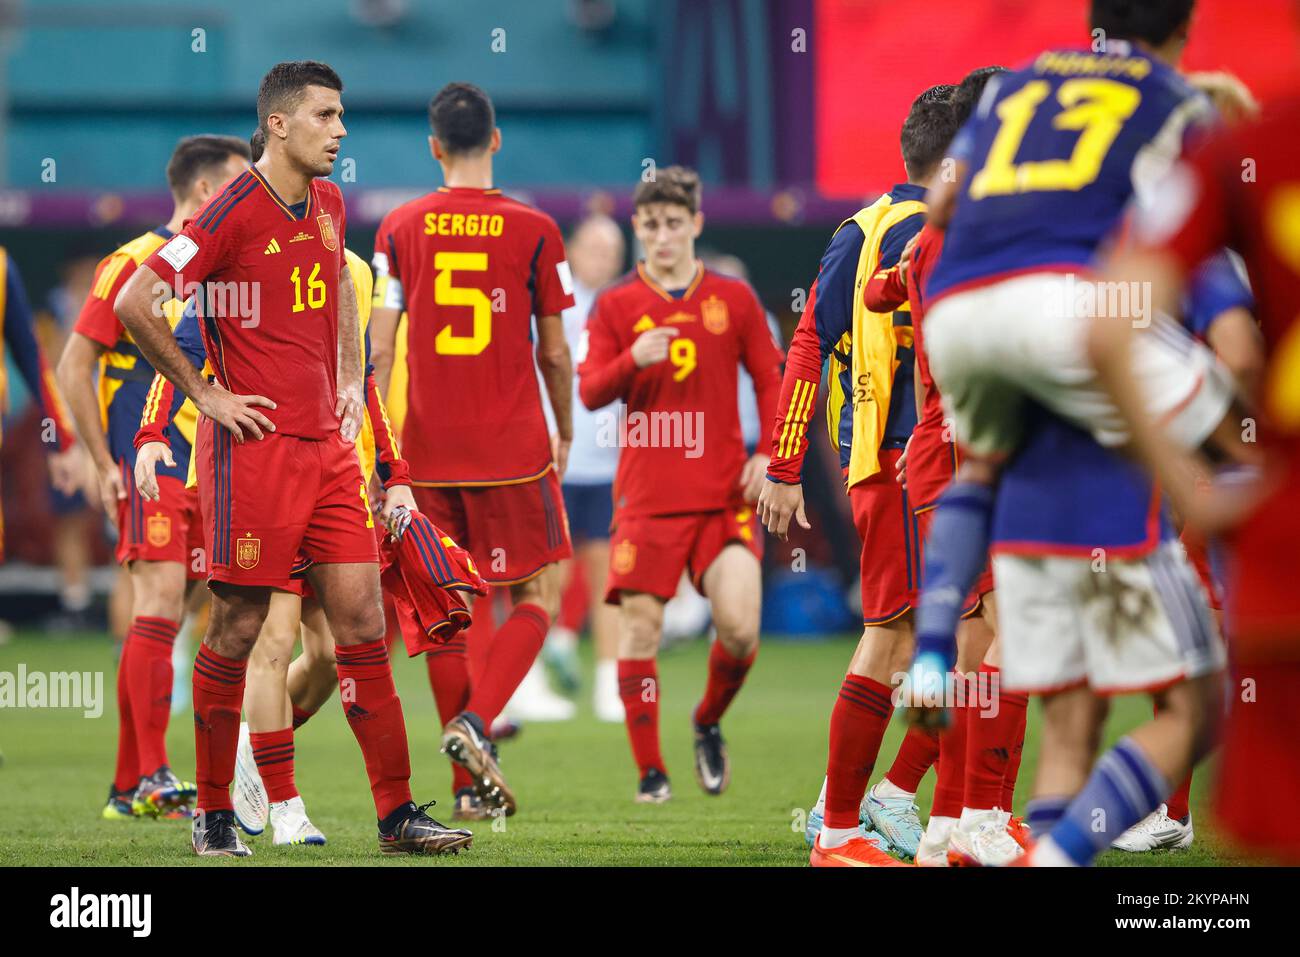 Doha, Catar. 01st Dec, 2022. Players from Spain mourn the defeat during a match between Japan and Spain, valid for the group stage of the World Cup, held at Khalifa International Stadium in Doha, Qatar. Credit: Rodolfo Buhrer/La Imagem/FotoArena/Alamy Live News Stock Photo